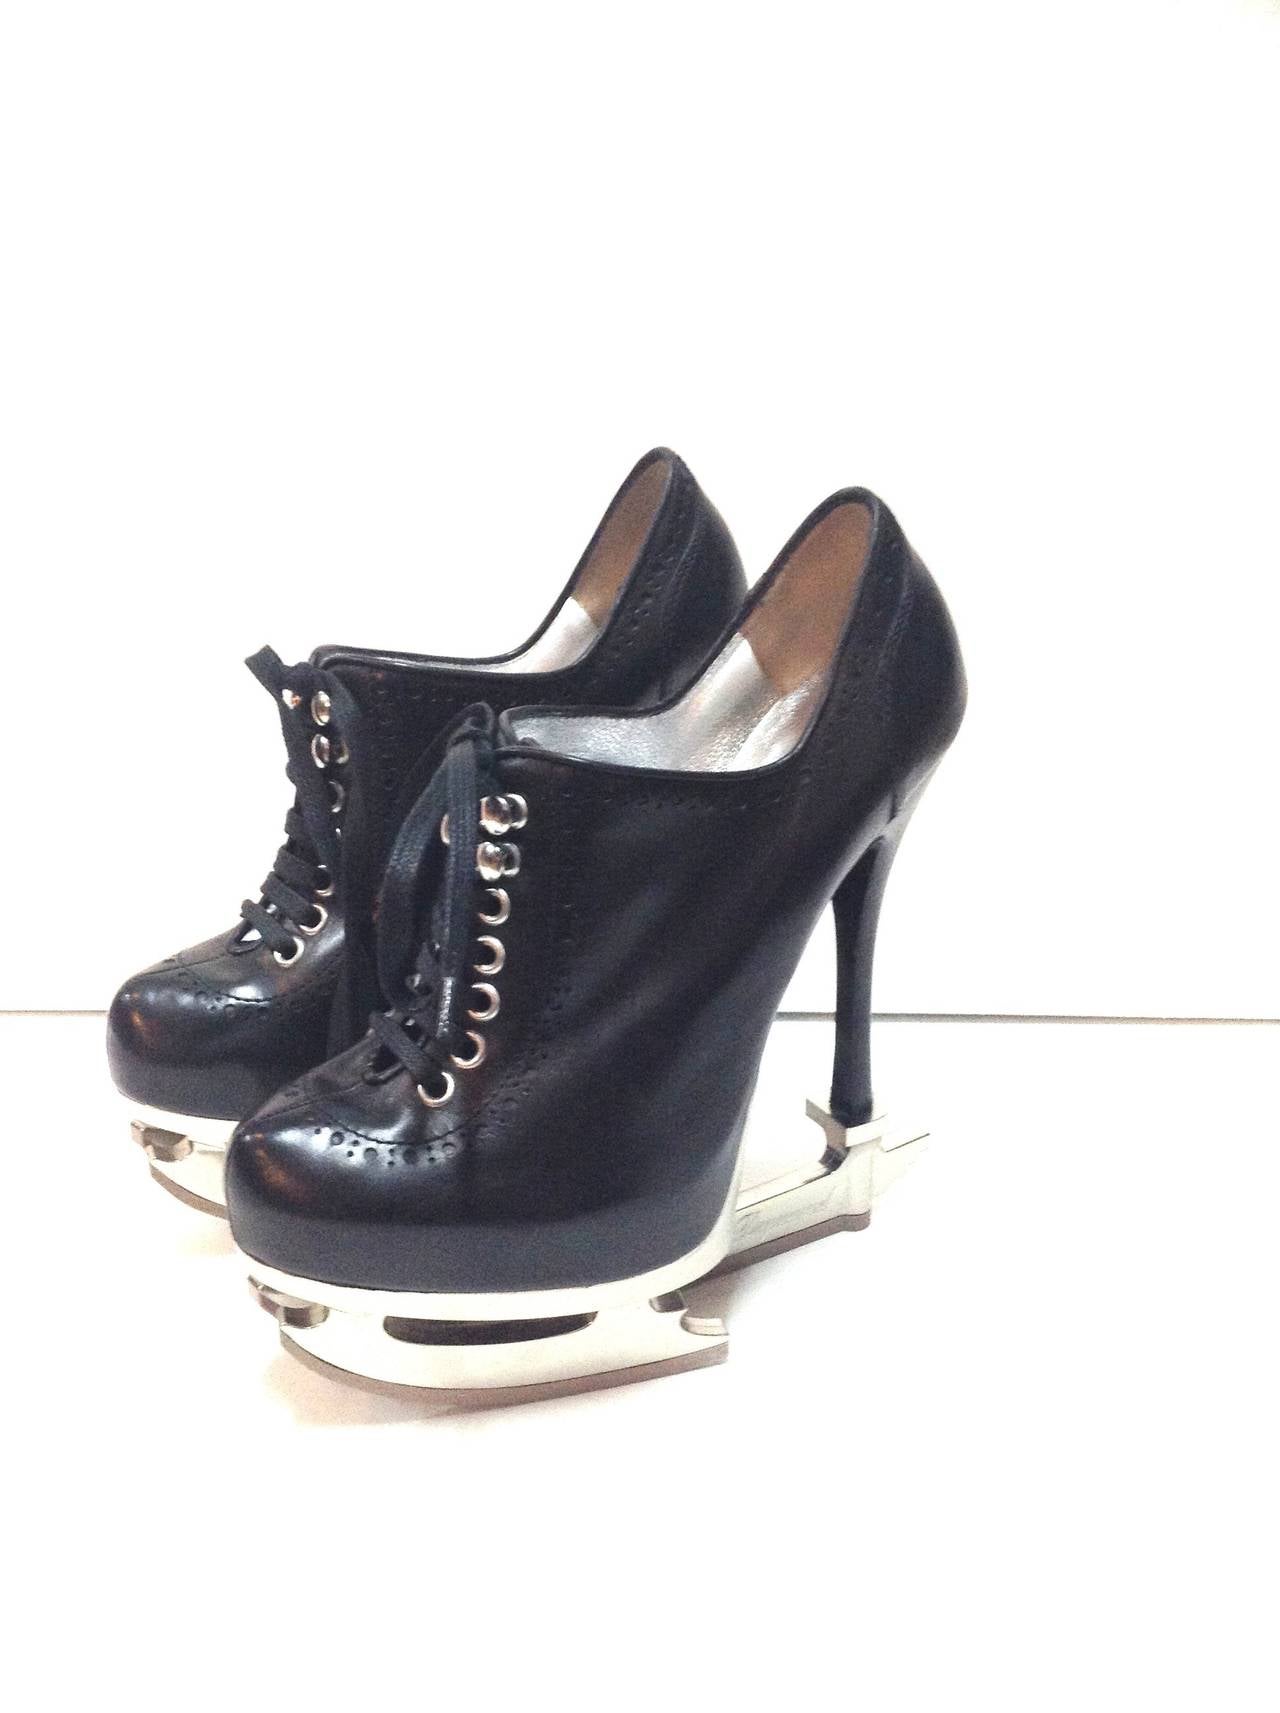 Women's 2013 DSqaured runway ice Skate size 38 For Sale